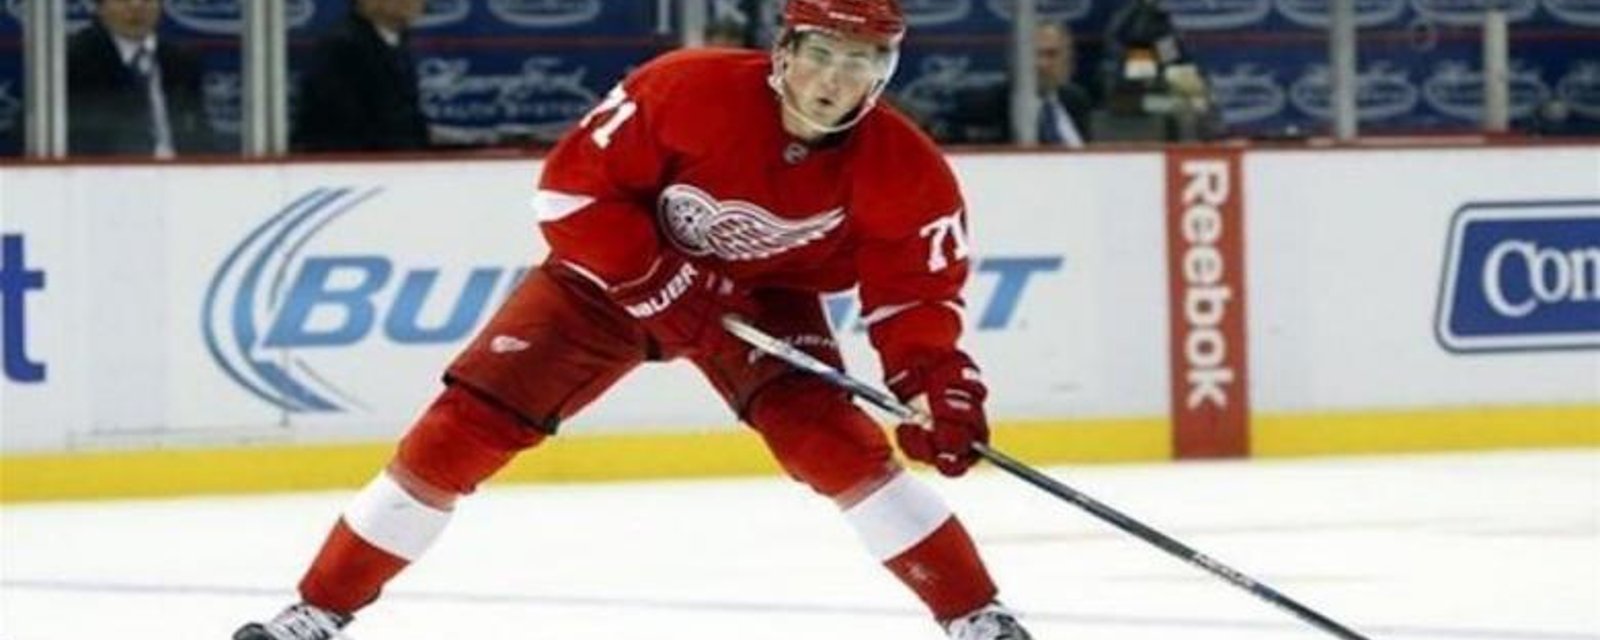 Dylan Larkin will represent Detroit at the All-Star game.